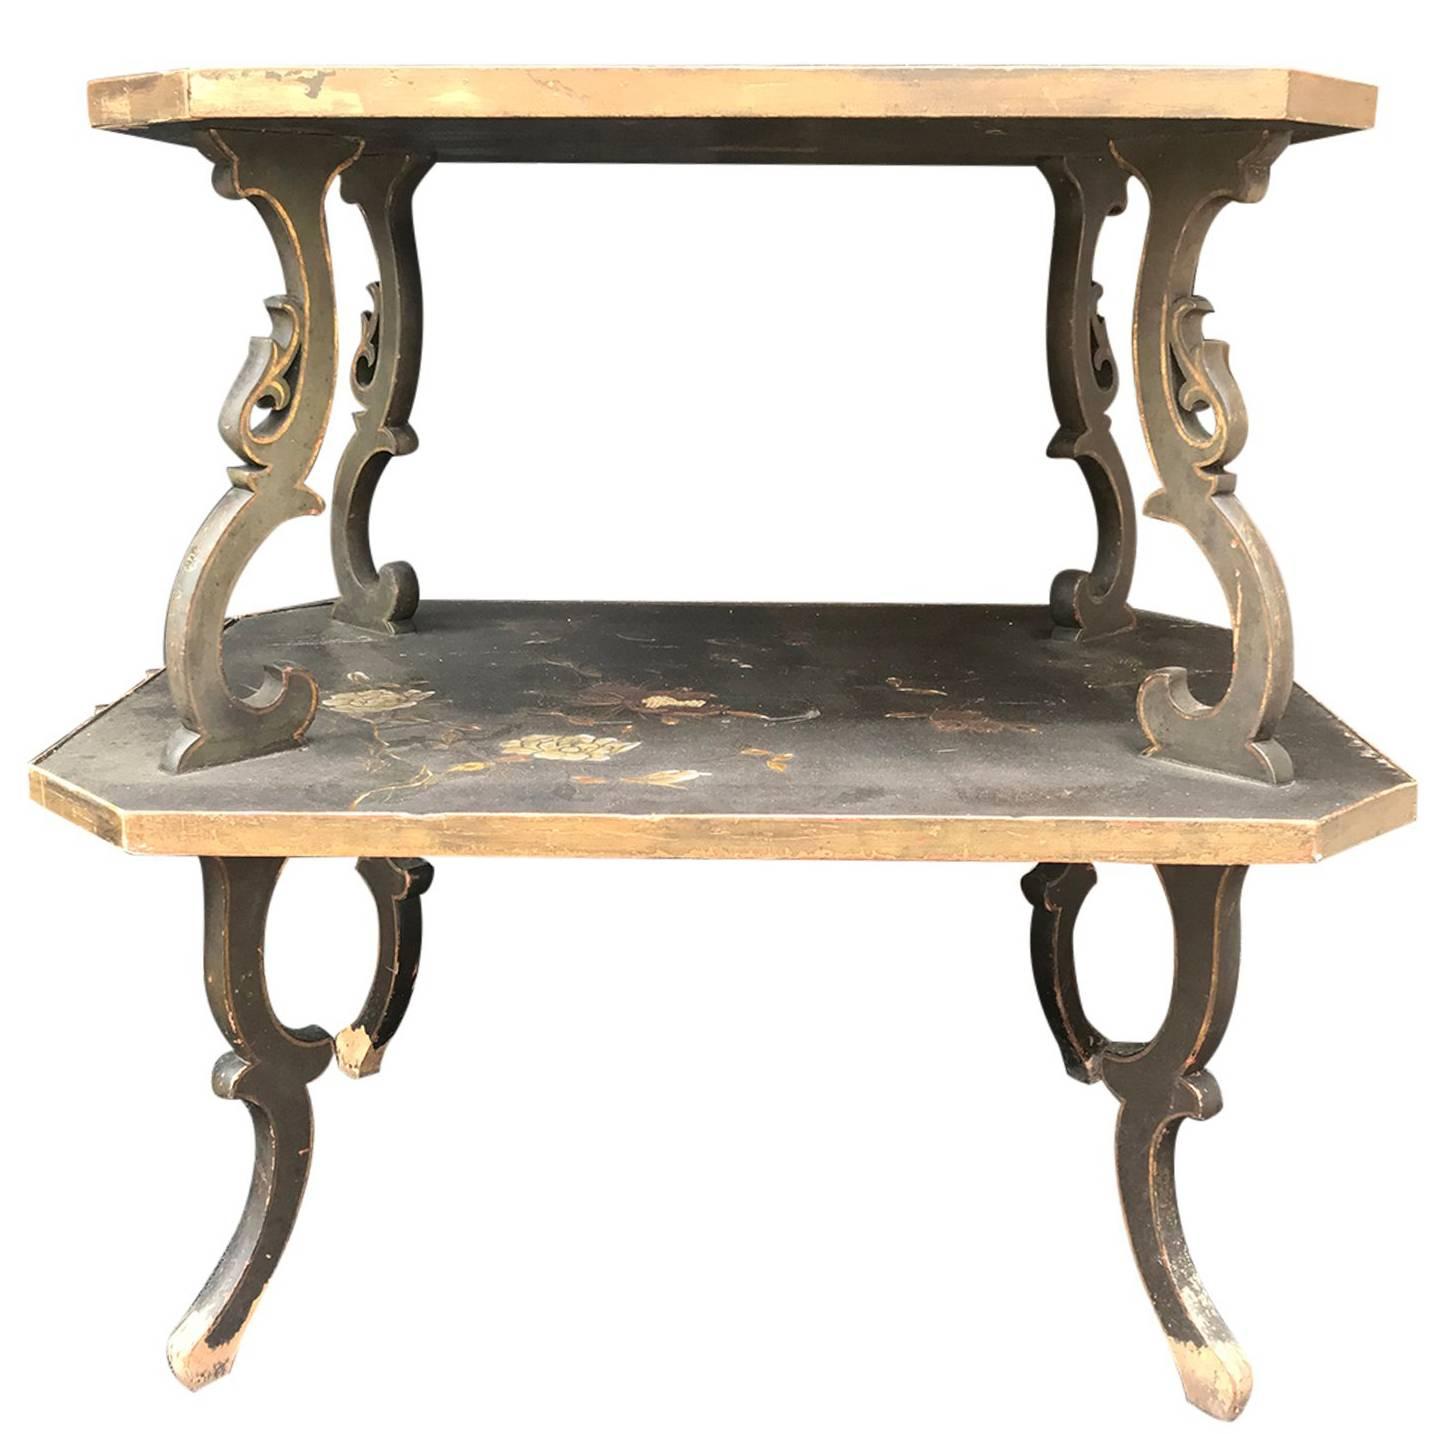 19th Century French Two-Tier Chinoiserie Table by Maison De L'Escalier